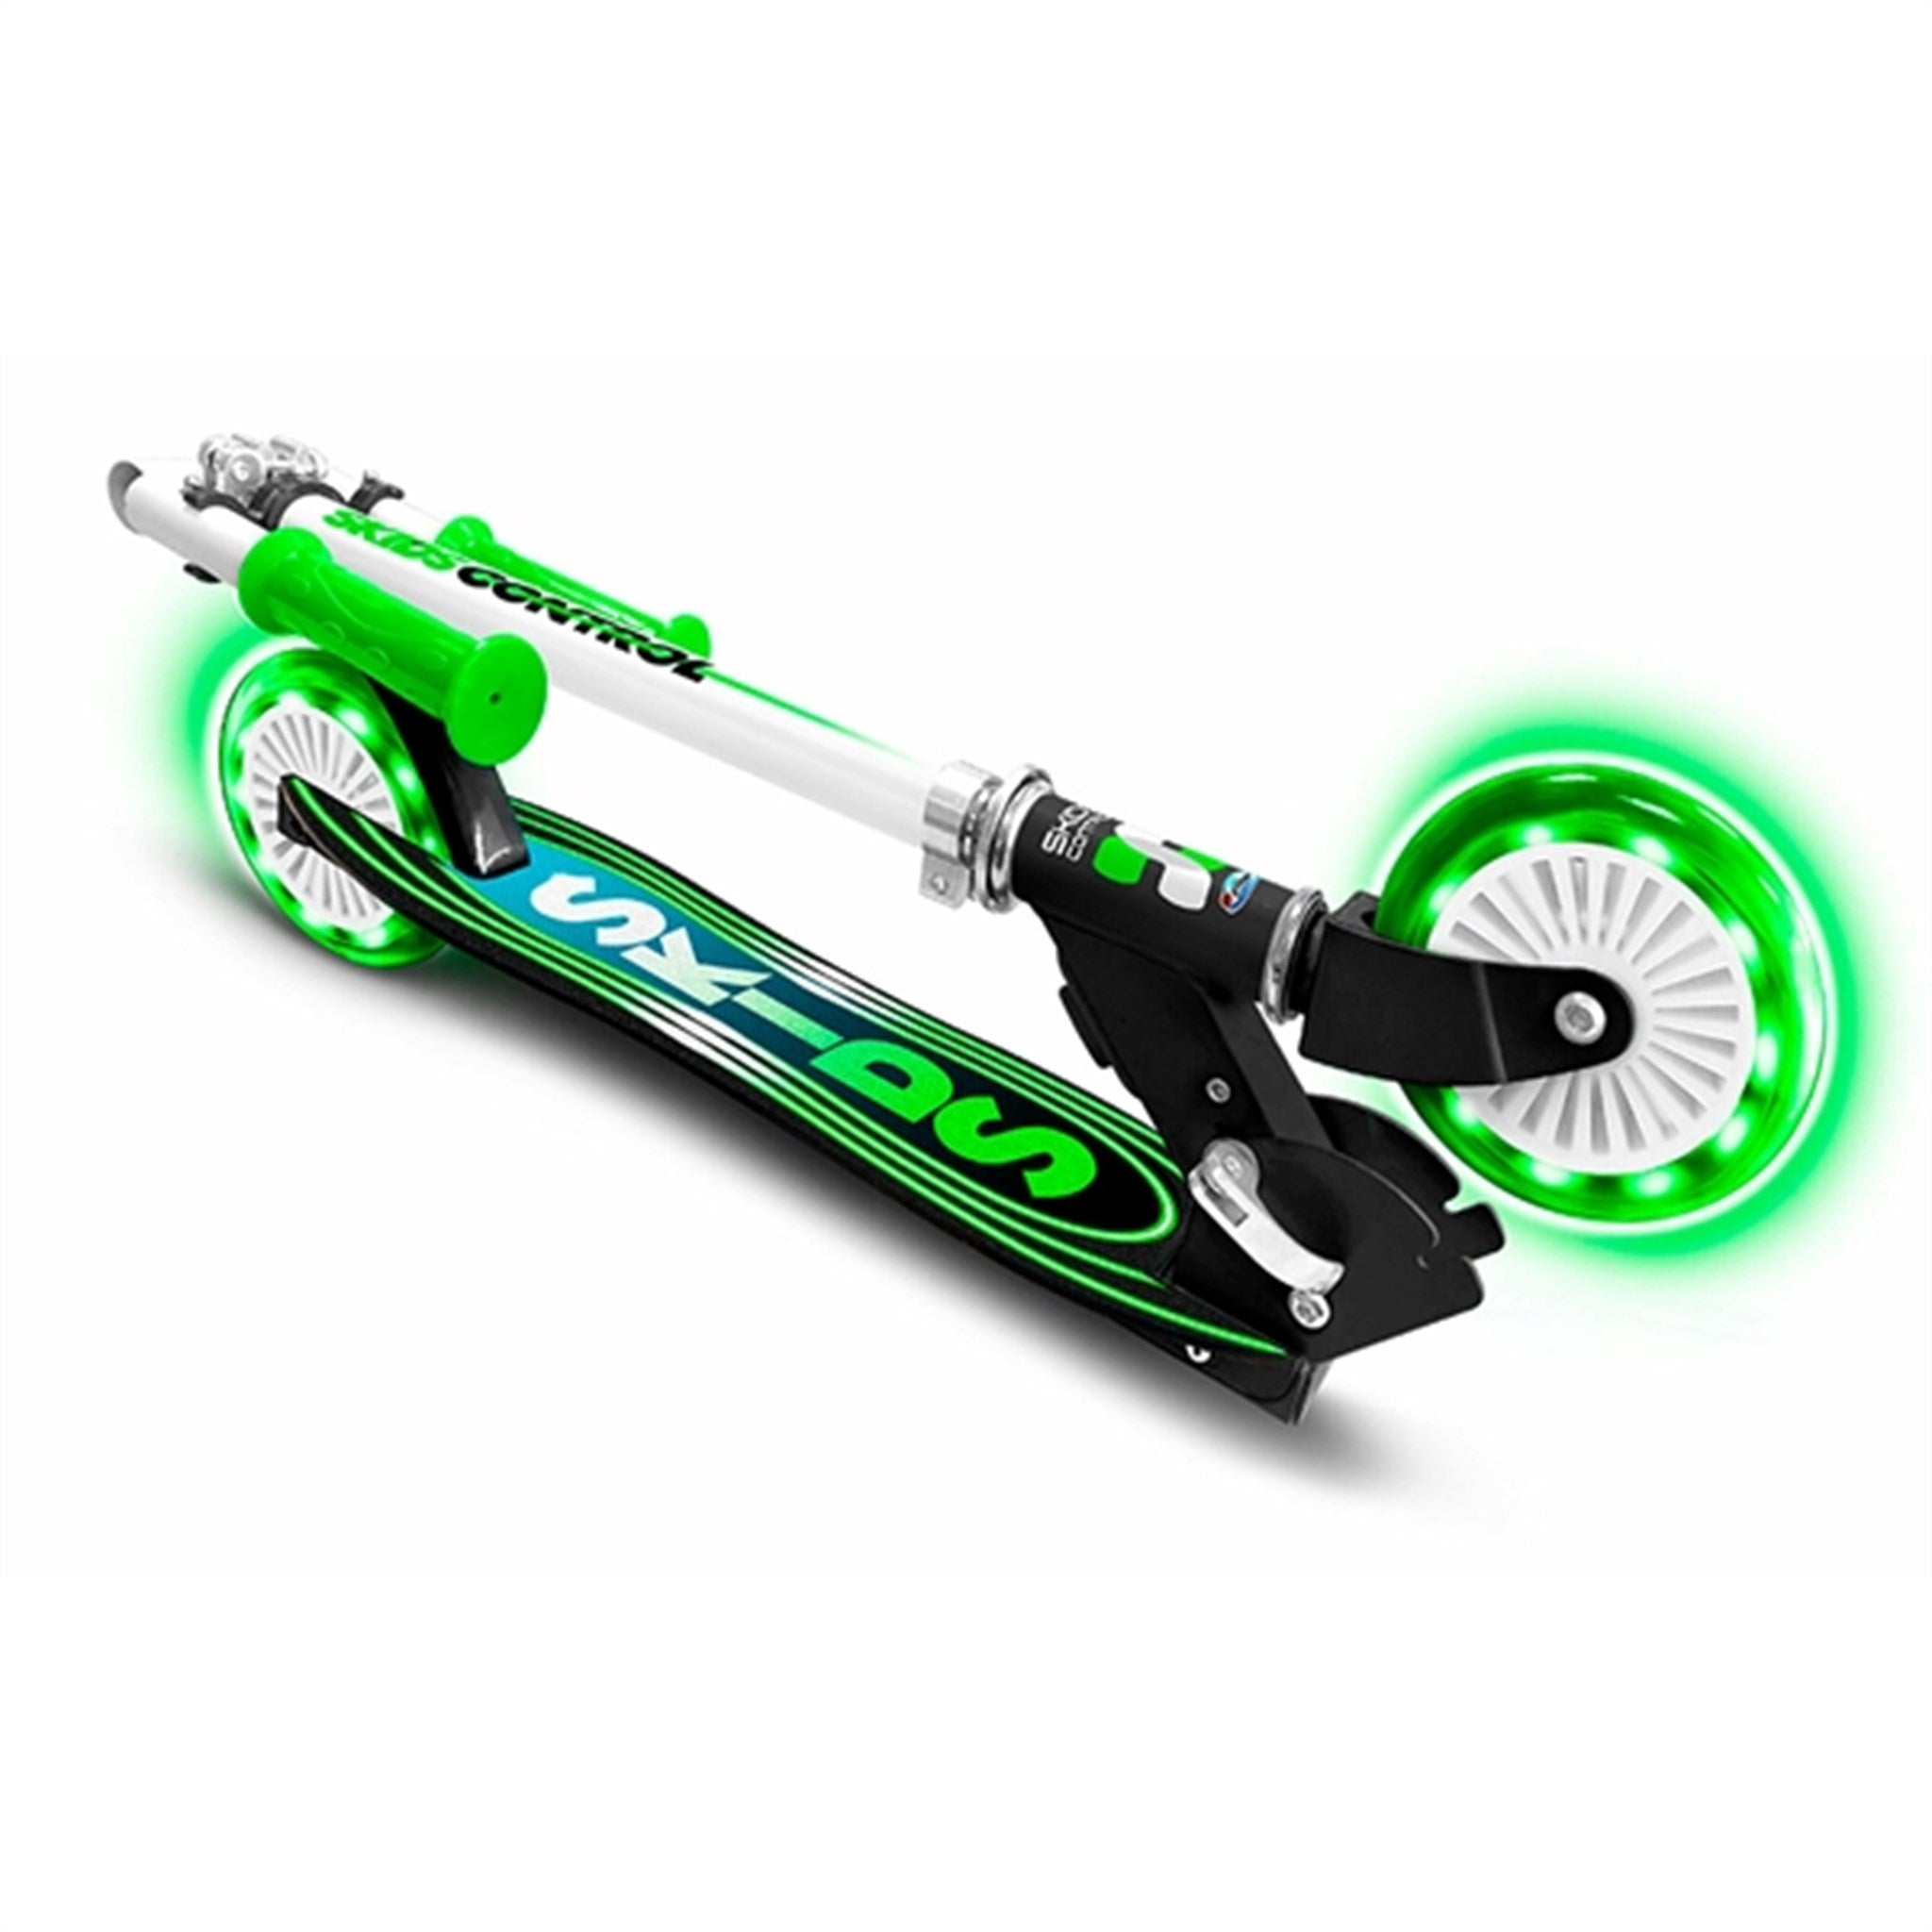 Skids Control Foldable Scooter w. Light Green 2